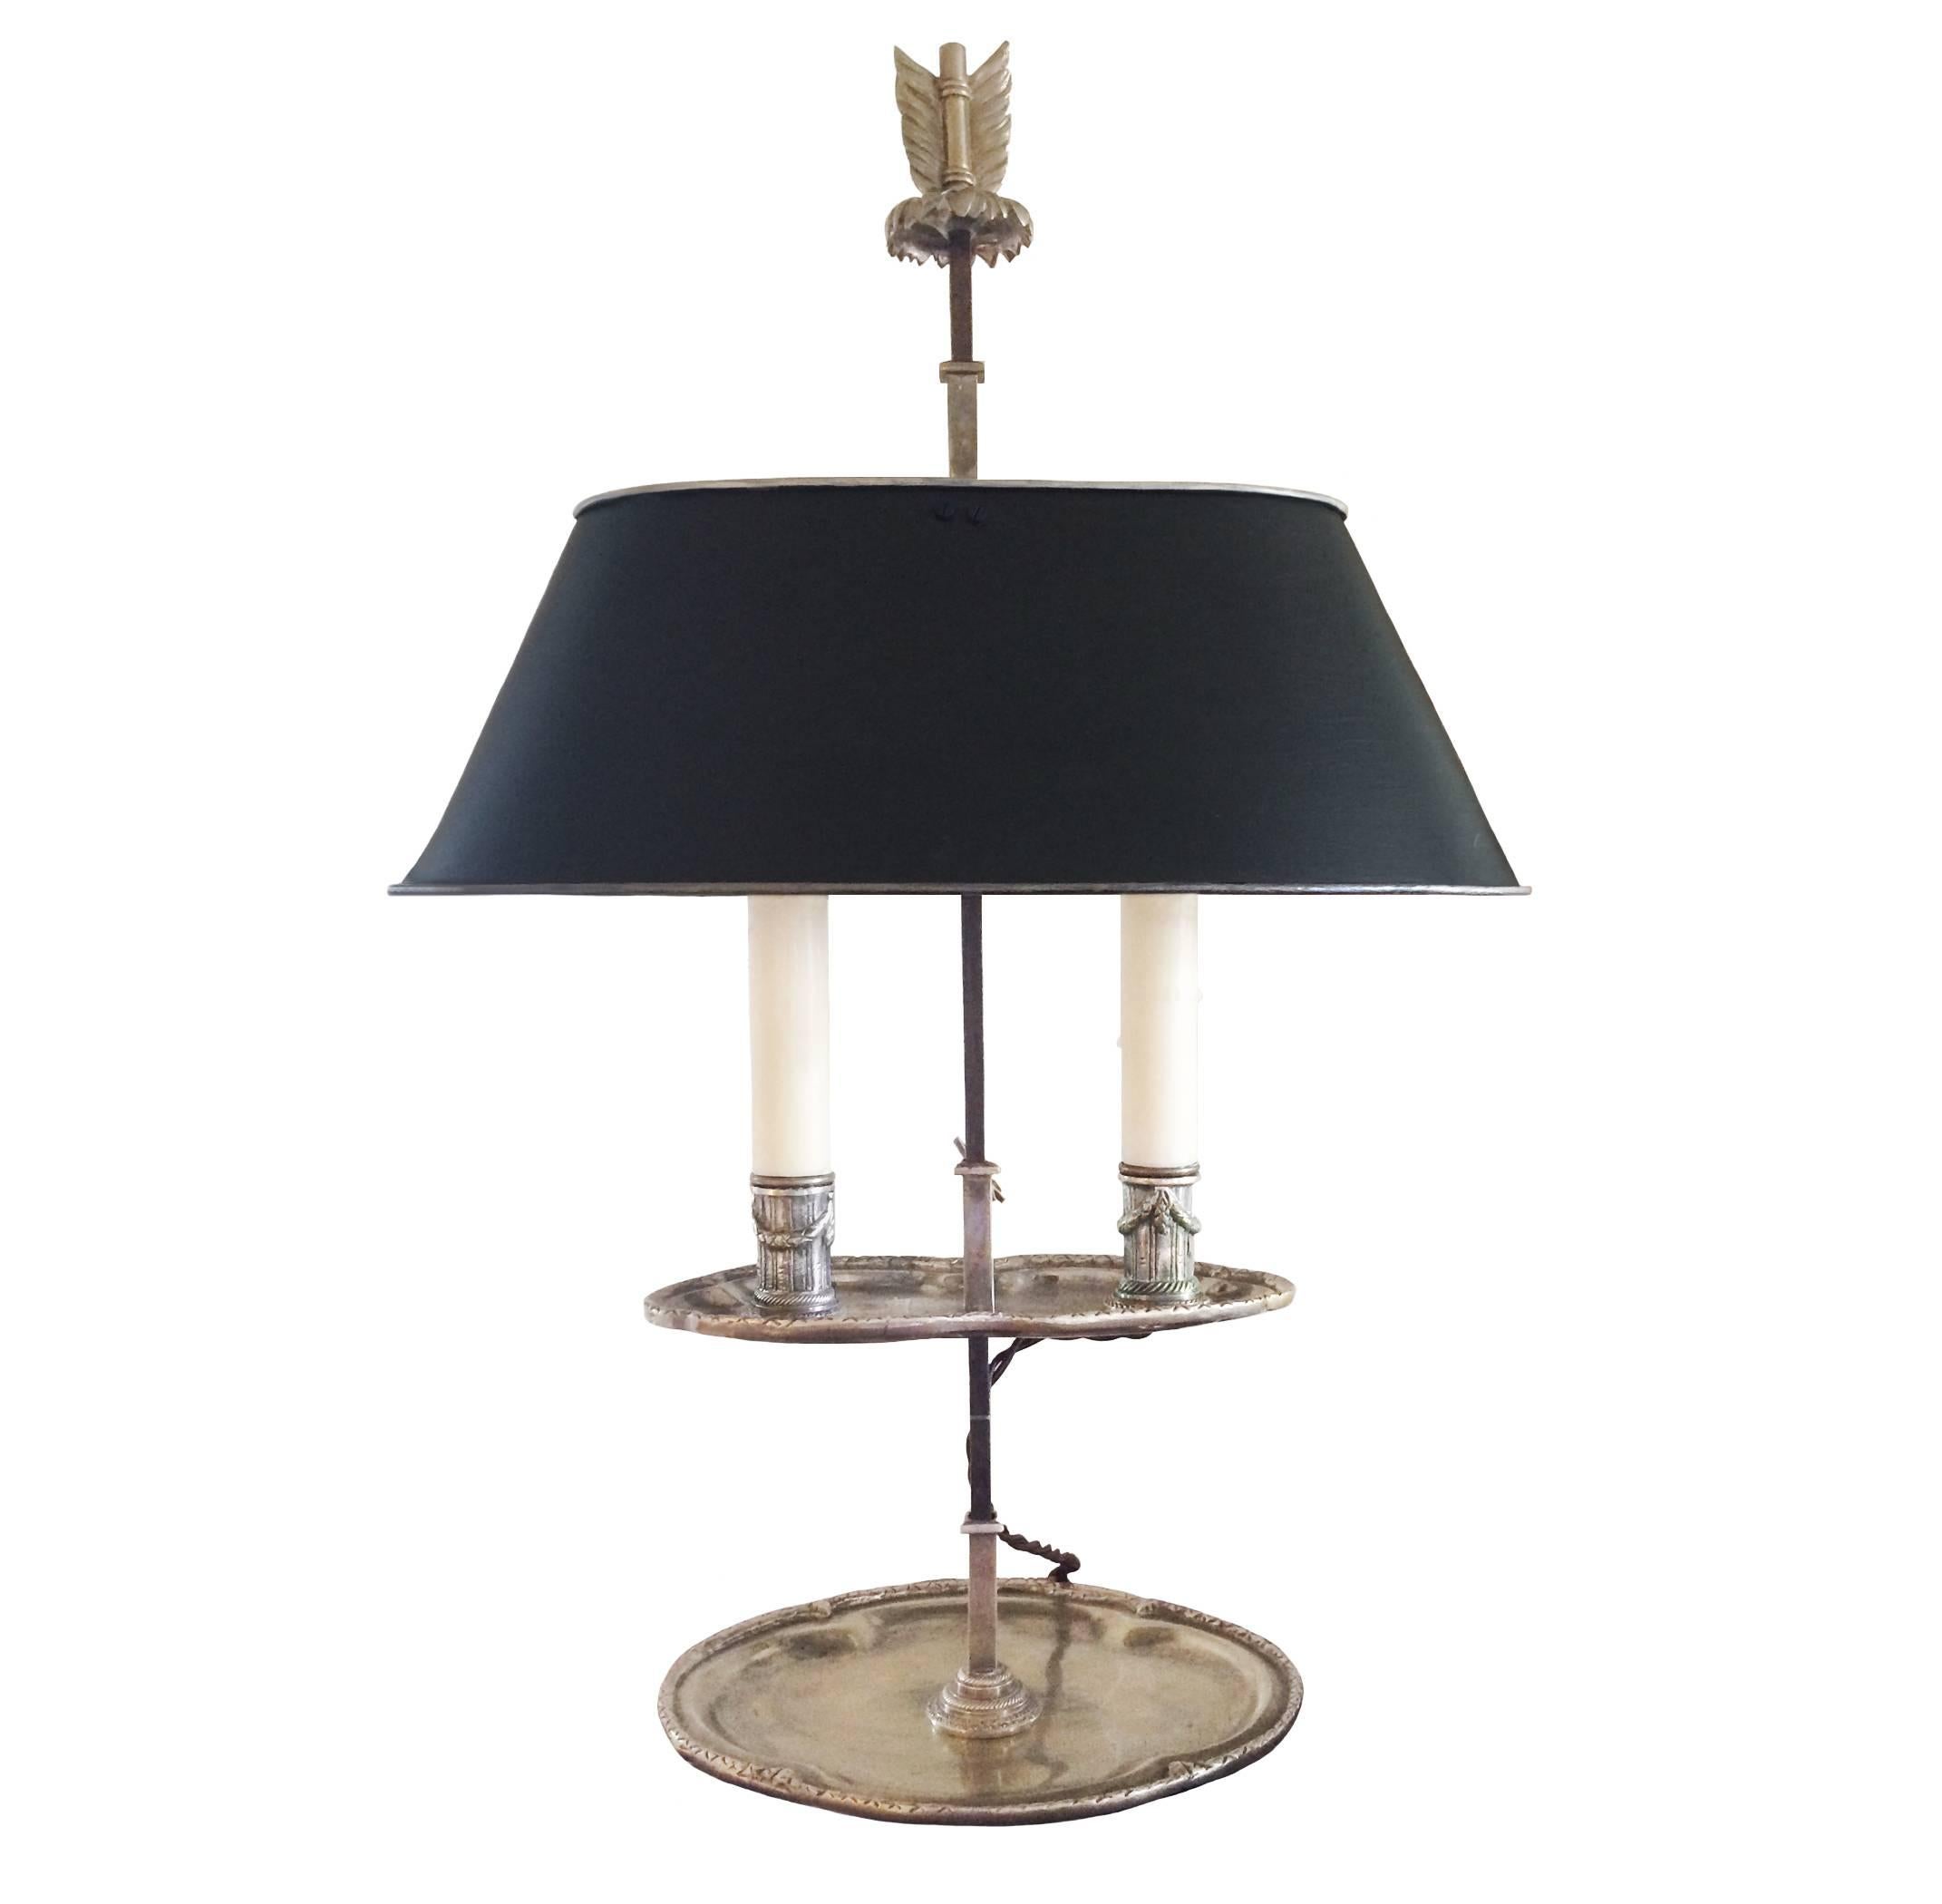 French LXVI style silver adjustable bouillote lamp with decorative finial; dark charcoal / green metal shade; circa 1890. Fabulous patina.